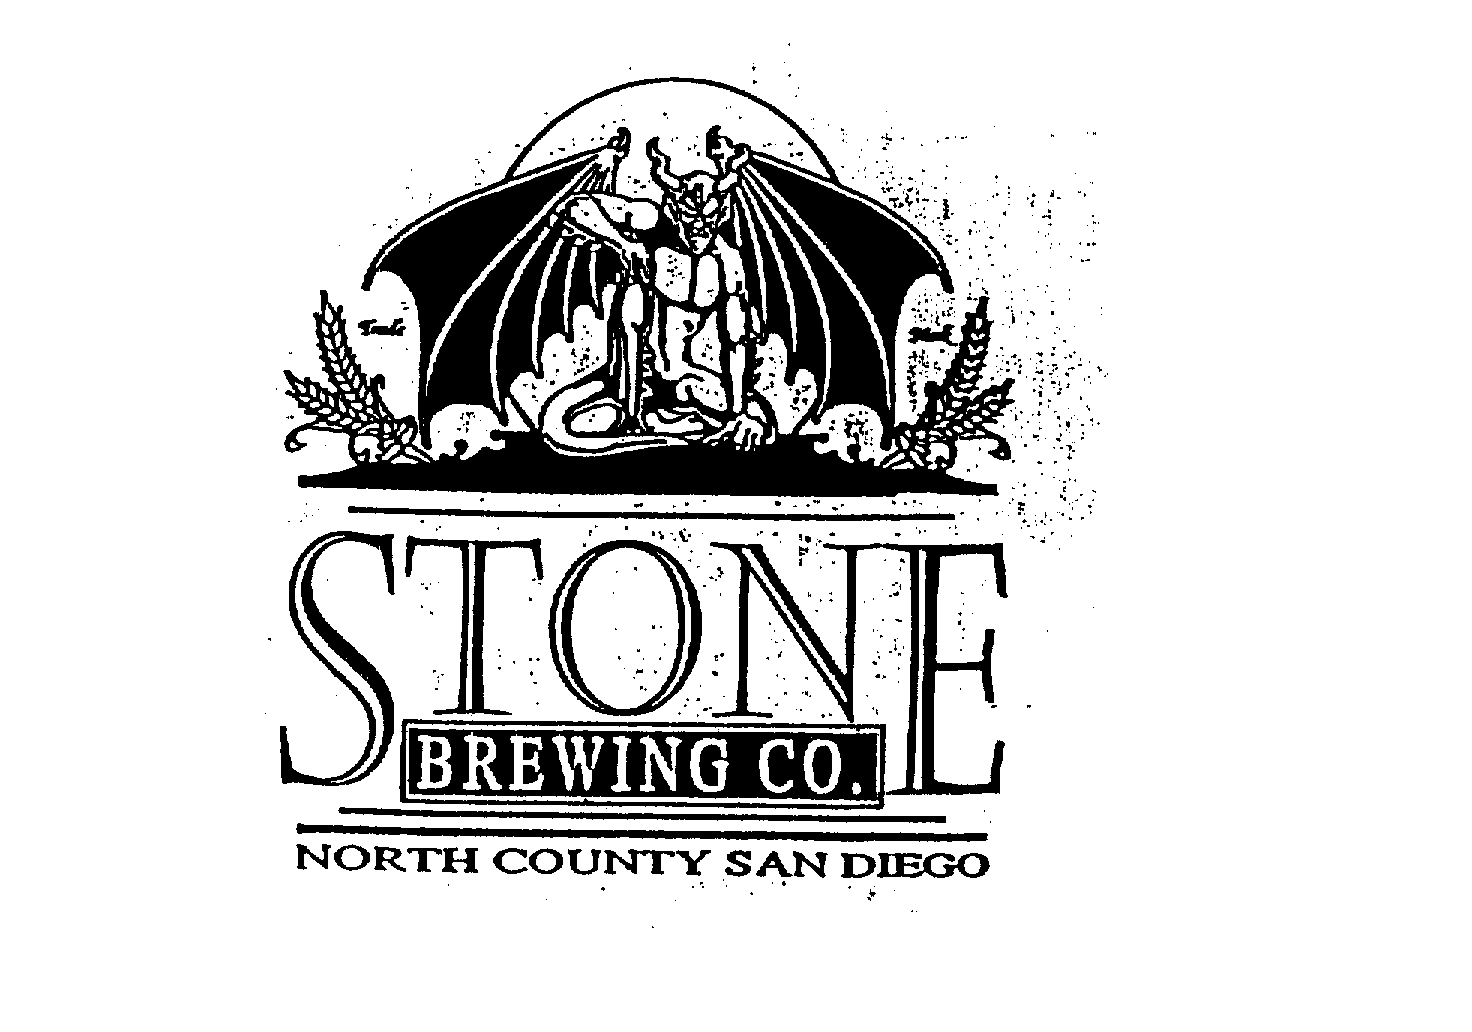  STONE BREWING CO. NORTH COUNTY SAN DIEGO